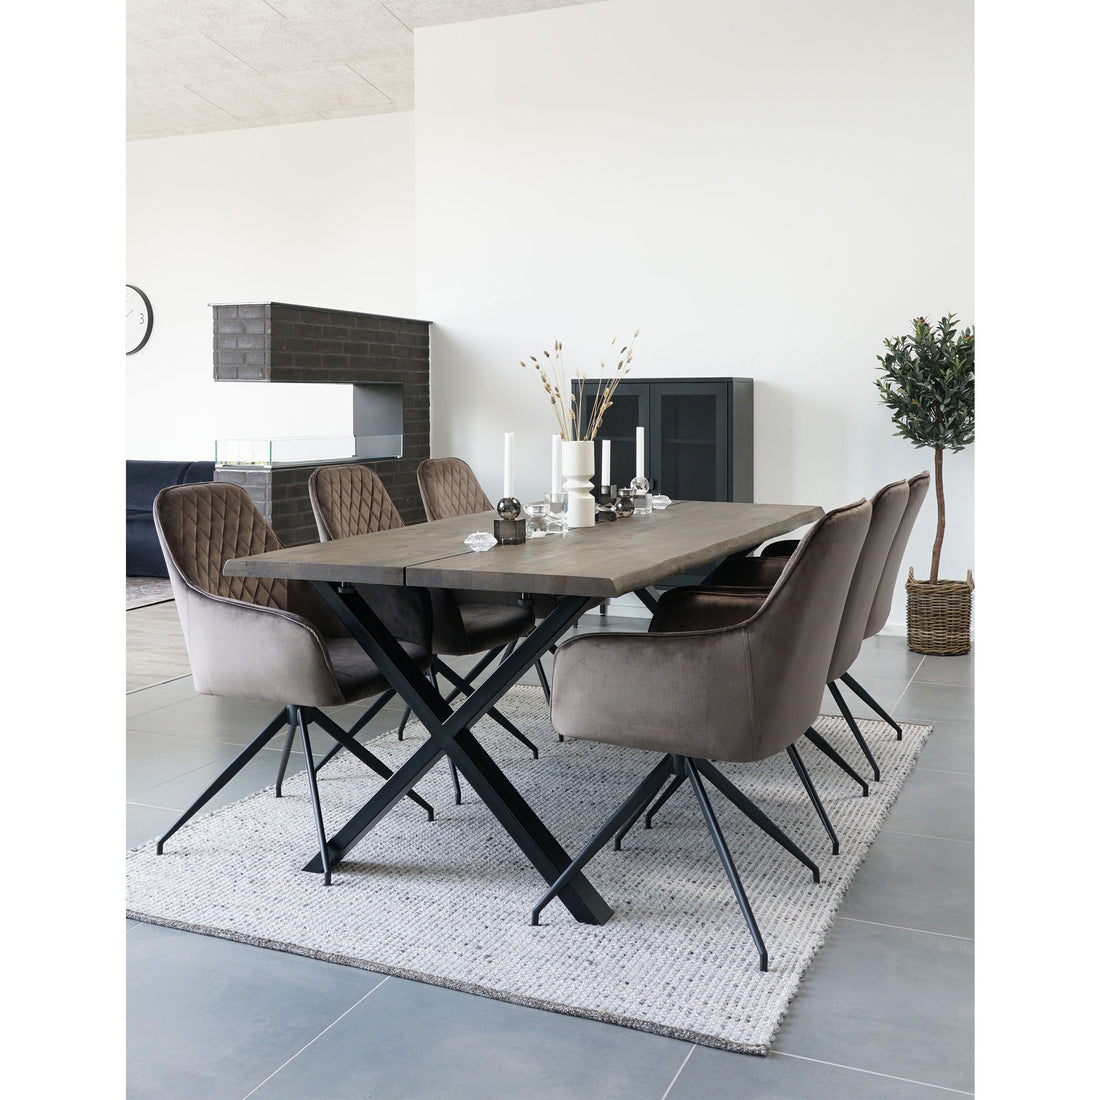 House Nordic - Harbo Dining Table Chair with Swivel Foot